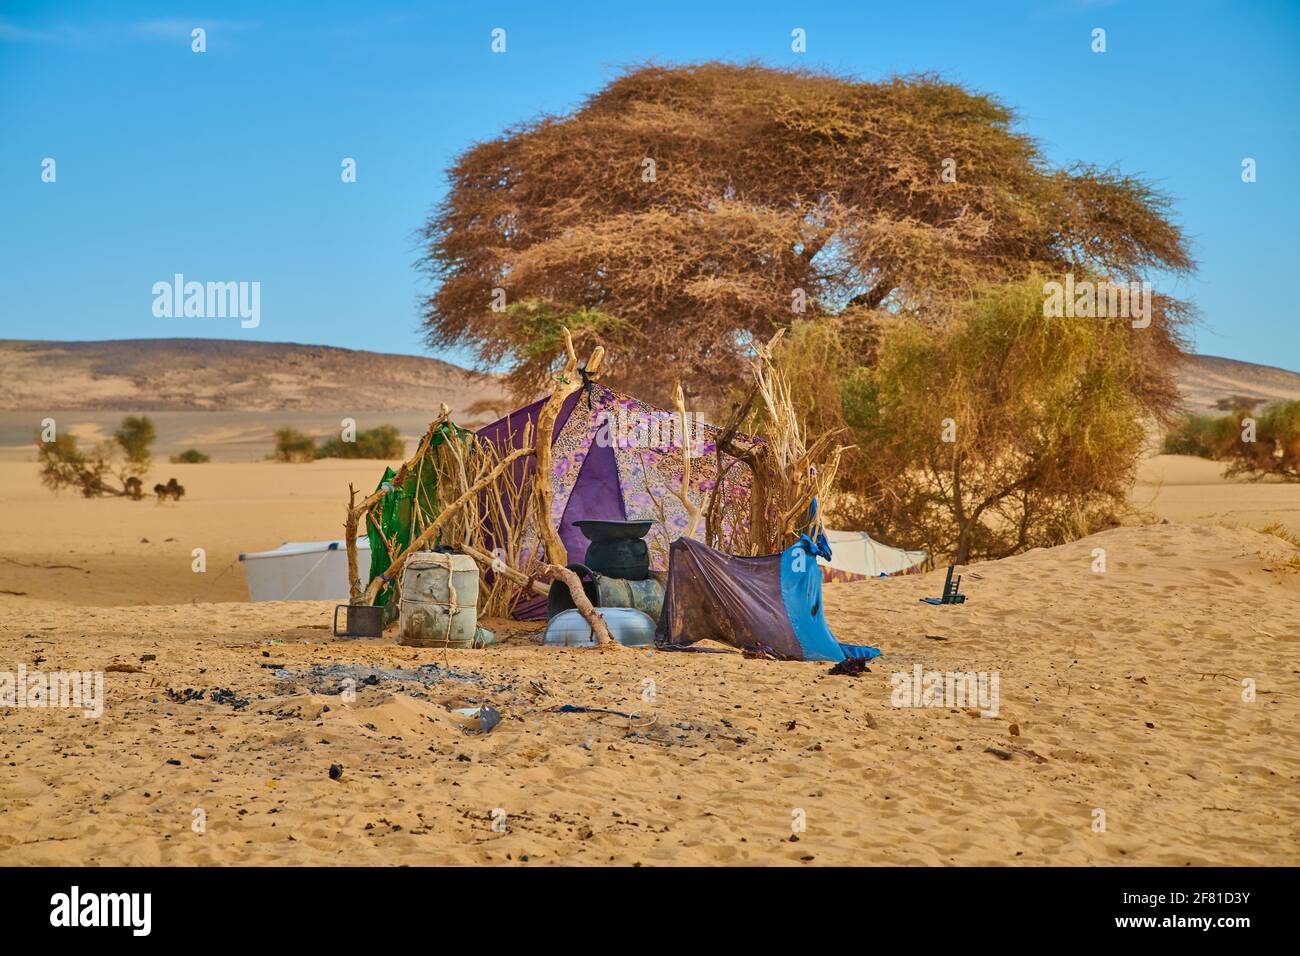 Nomad Tent in the Sahara Stock Photo